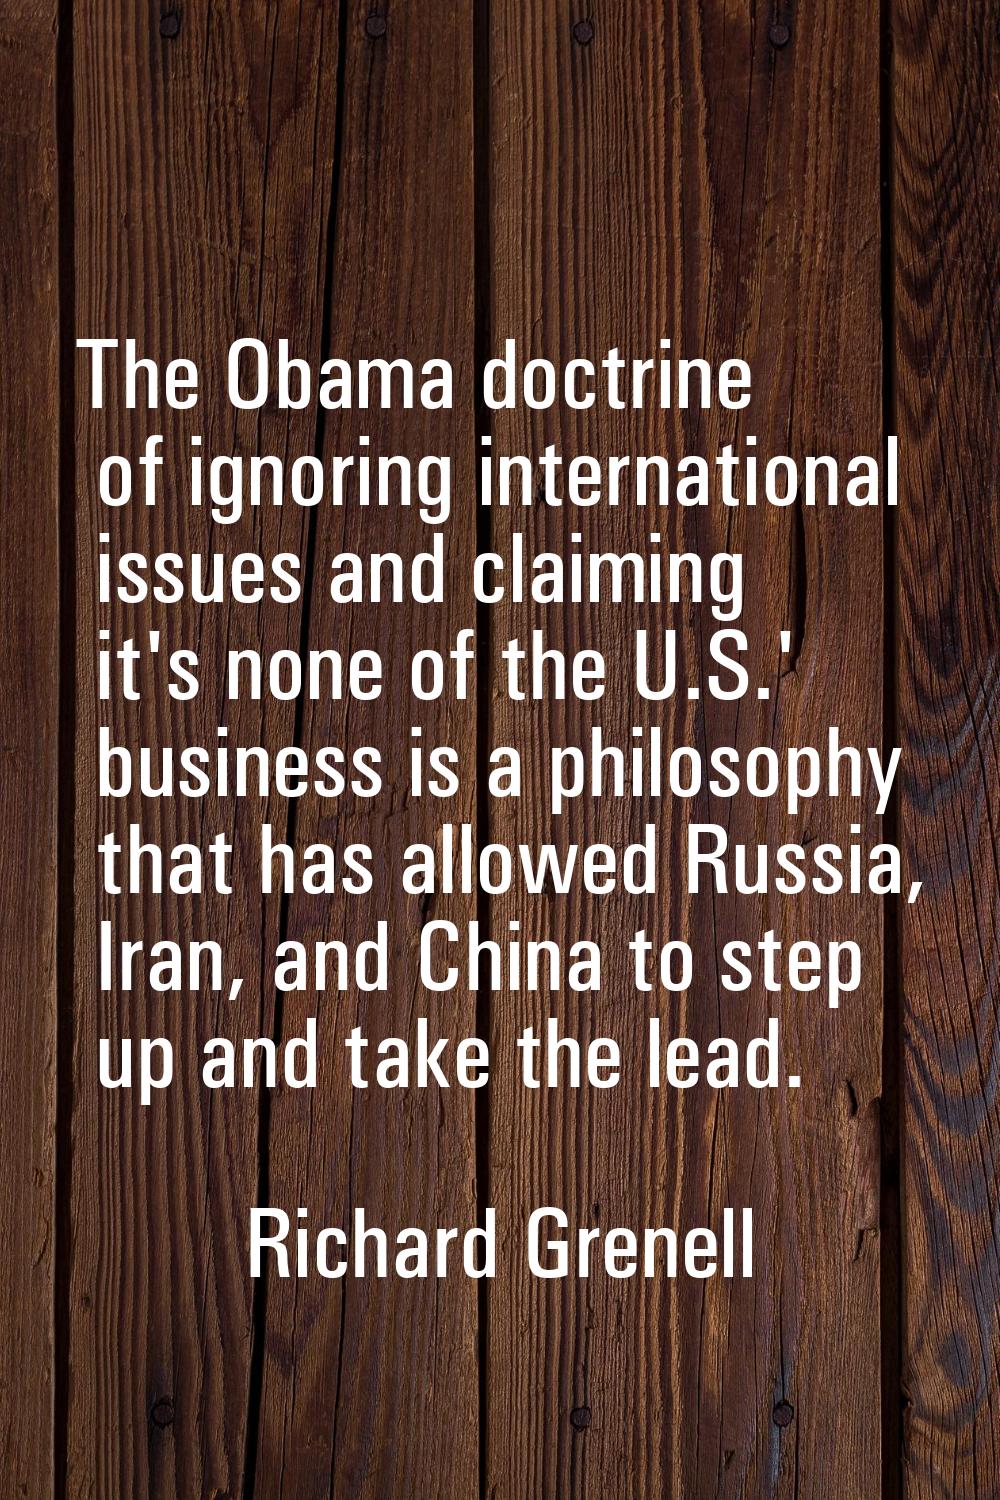 The Obama doctrine of ignoring international issues and claiming it's none of the U.S.' business is